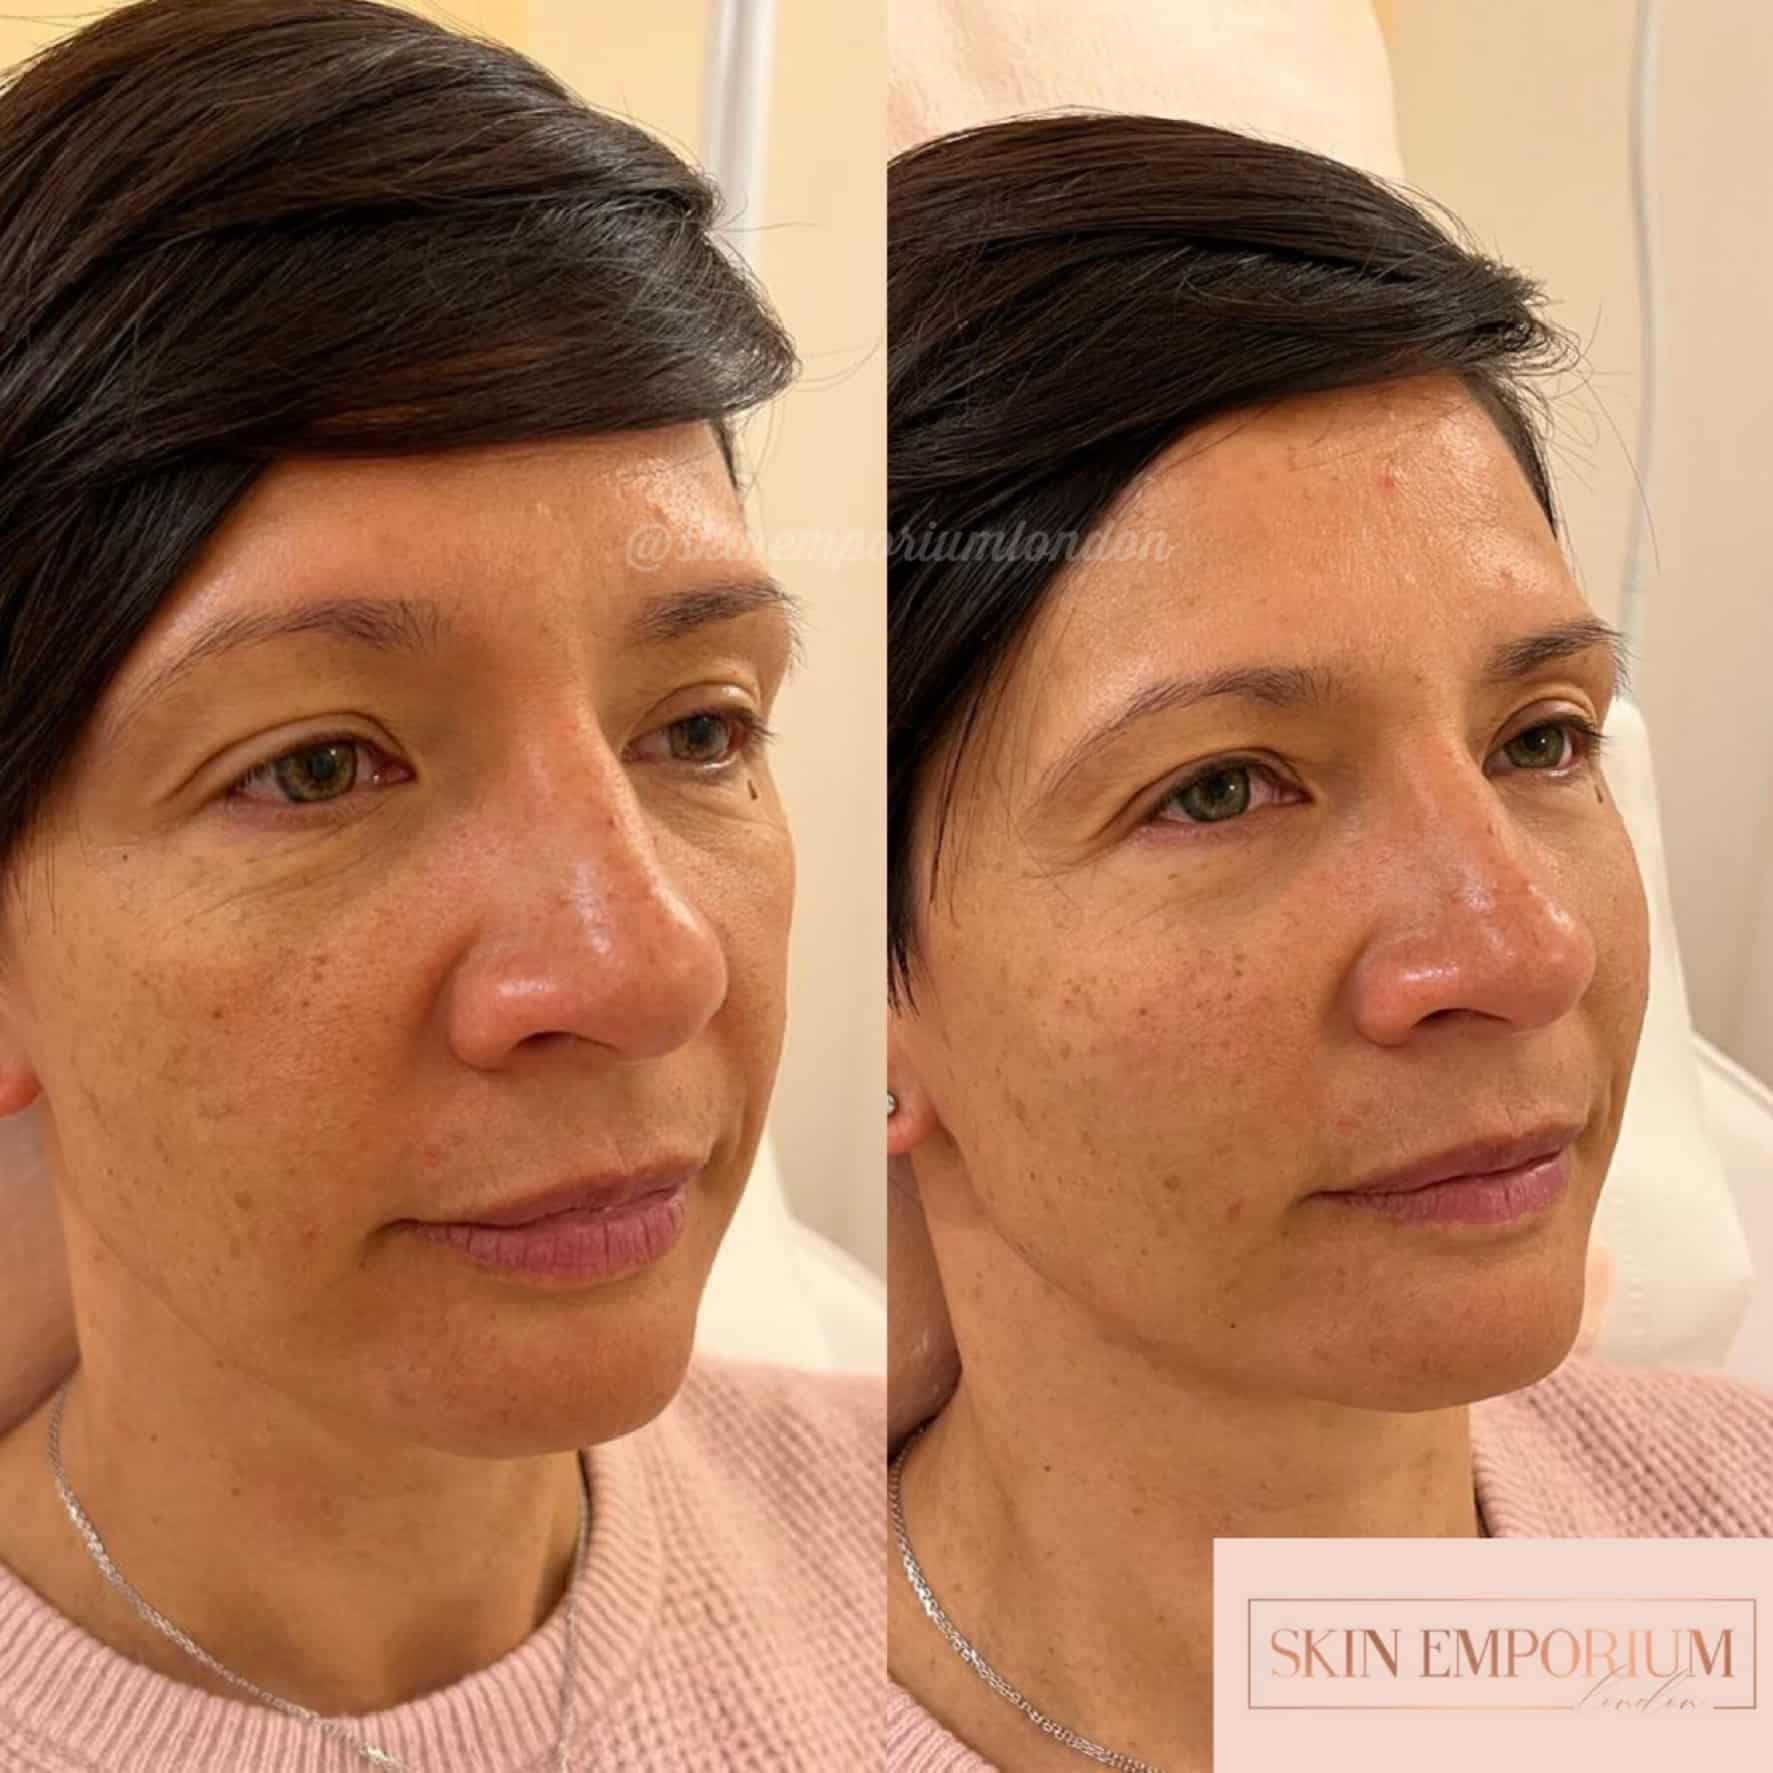 Before and after photo of a women having received facial filler treatment at the Skin Emporium in Clapham, London.